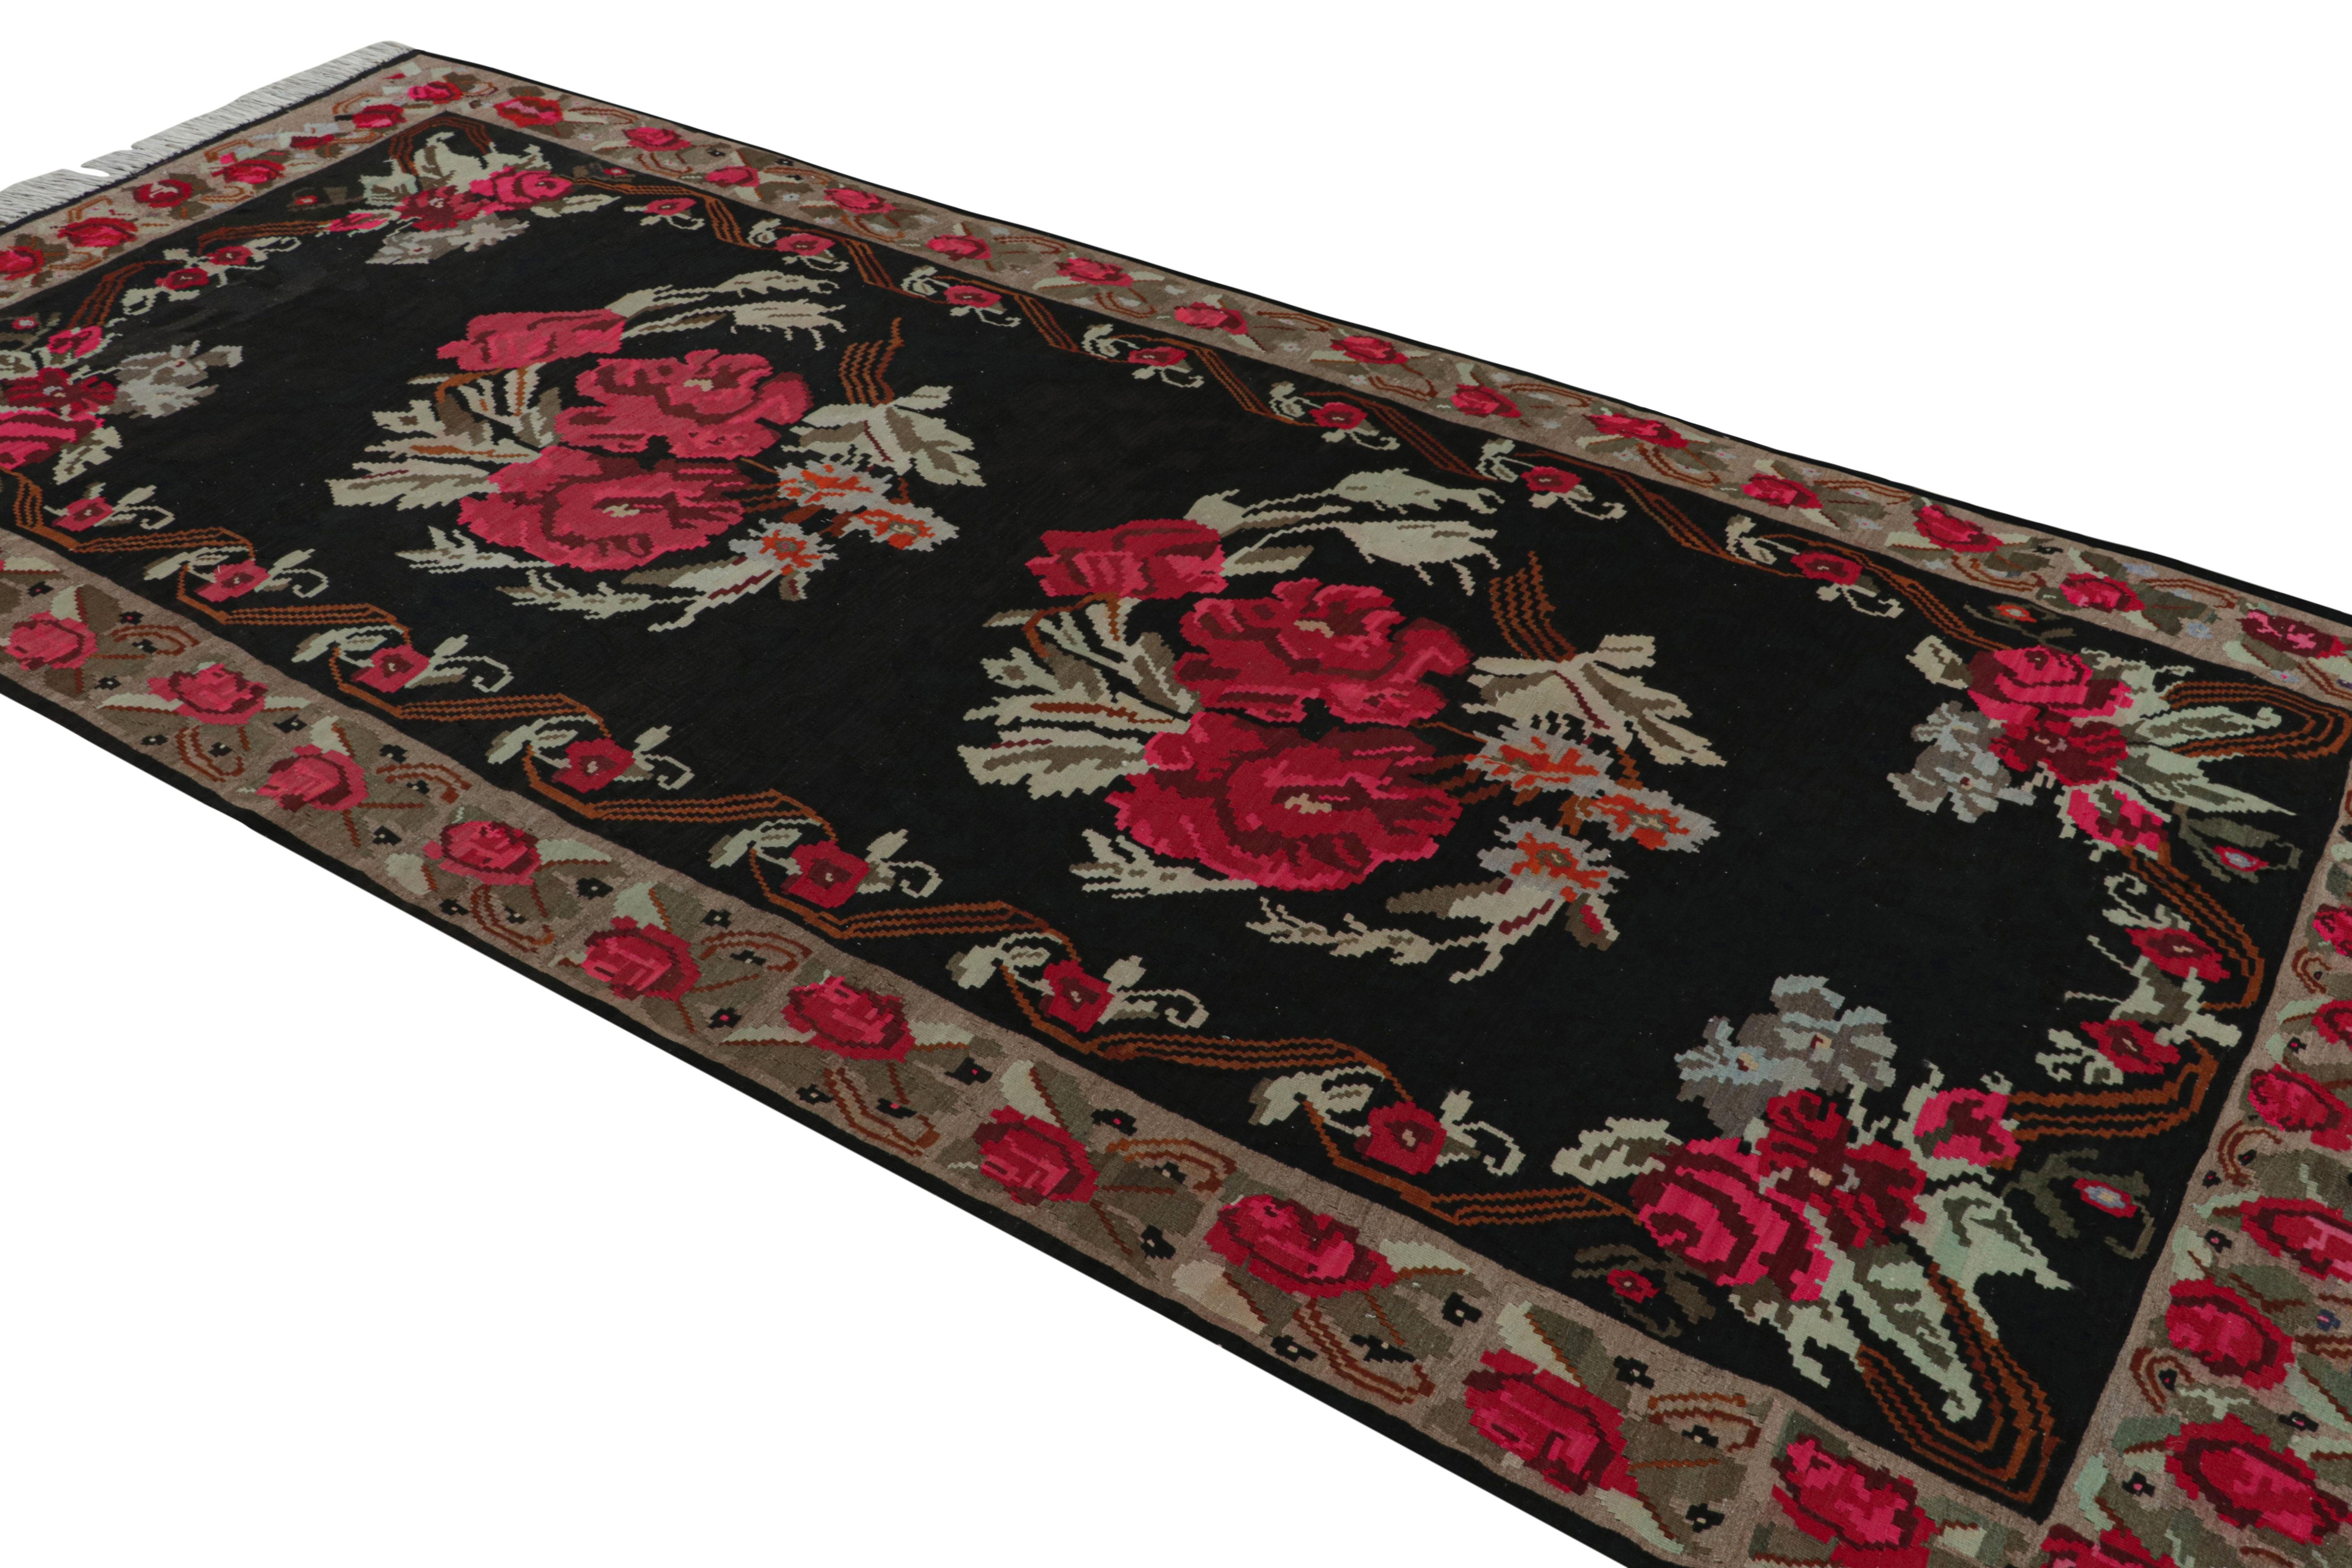 Midcentury Kilim Rug Vintage Black Red Floral Pattern Flat-Weave by Rug & Kilim In Good Condition For Sale In Long Island City, NY